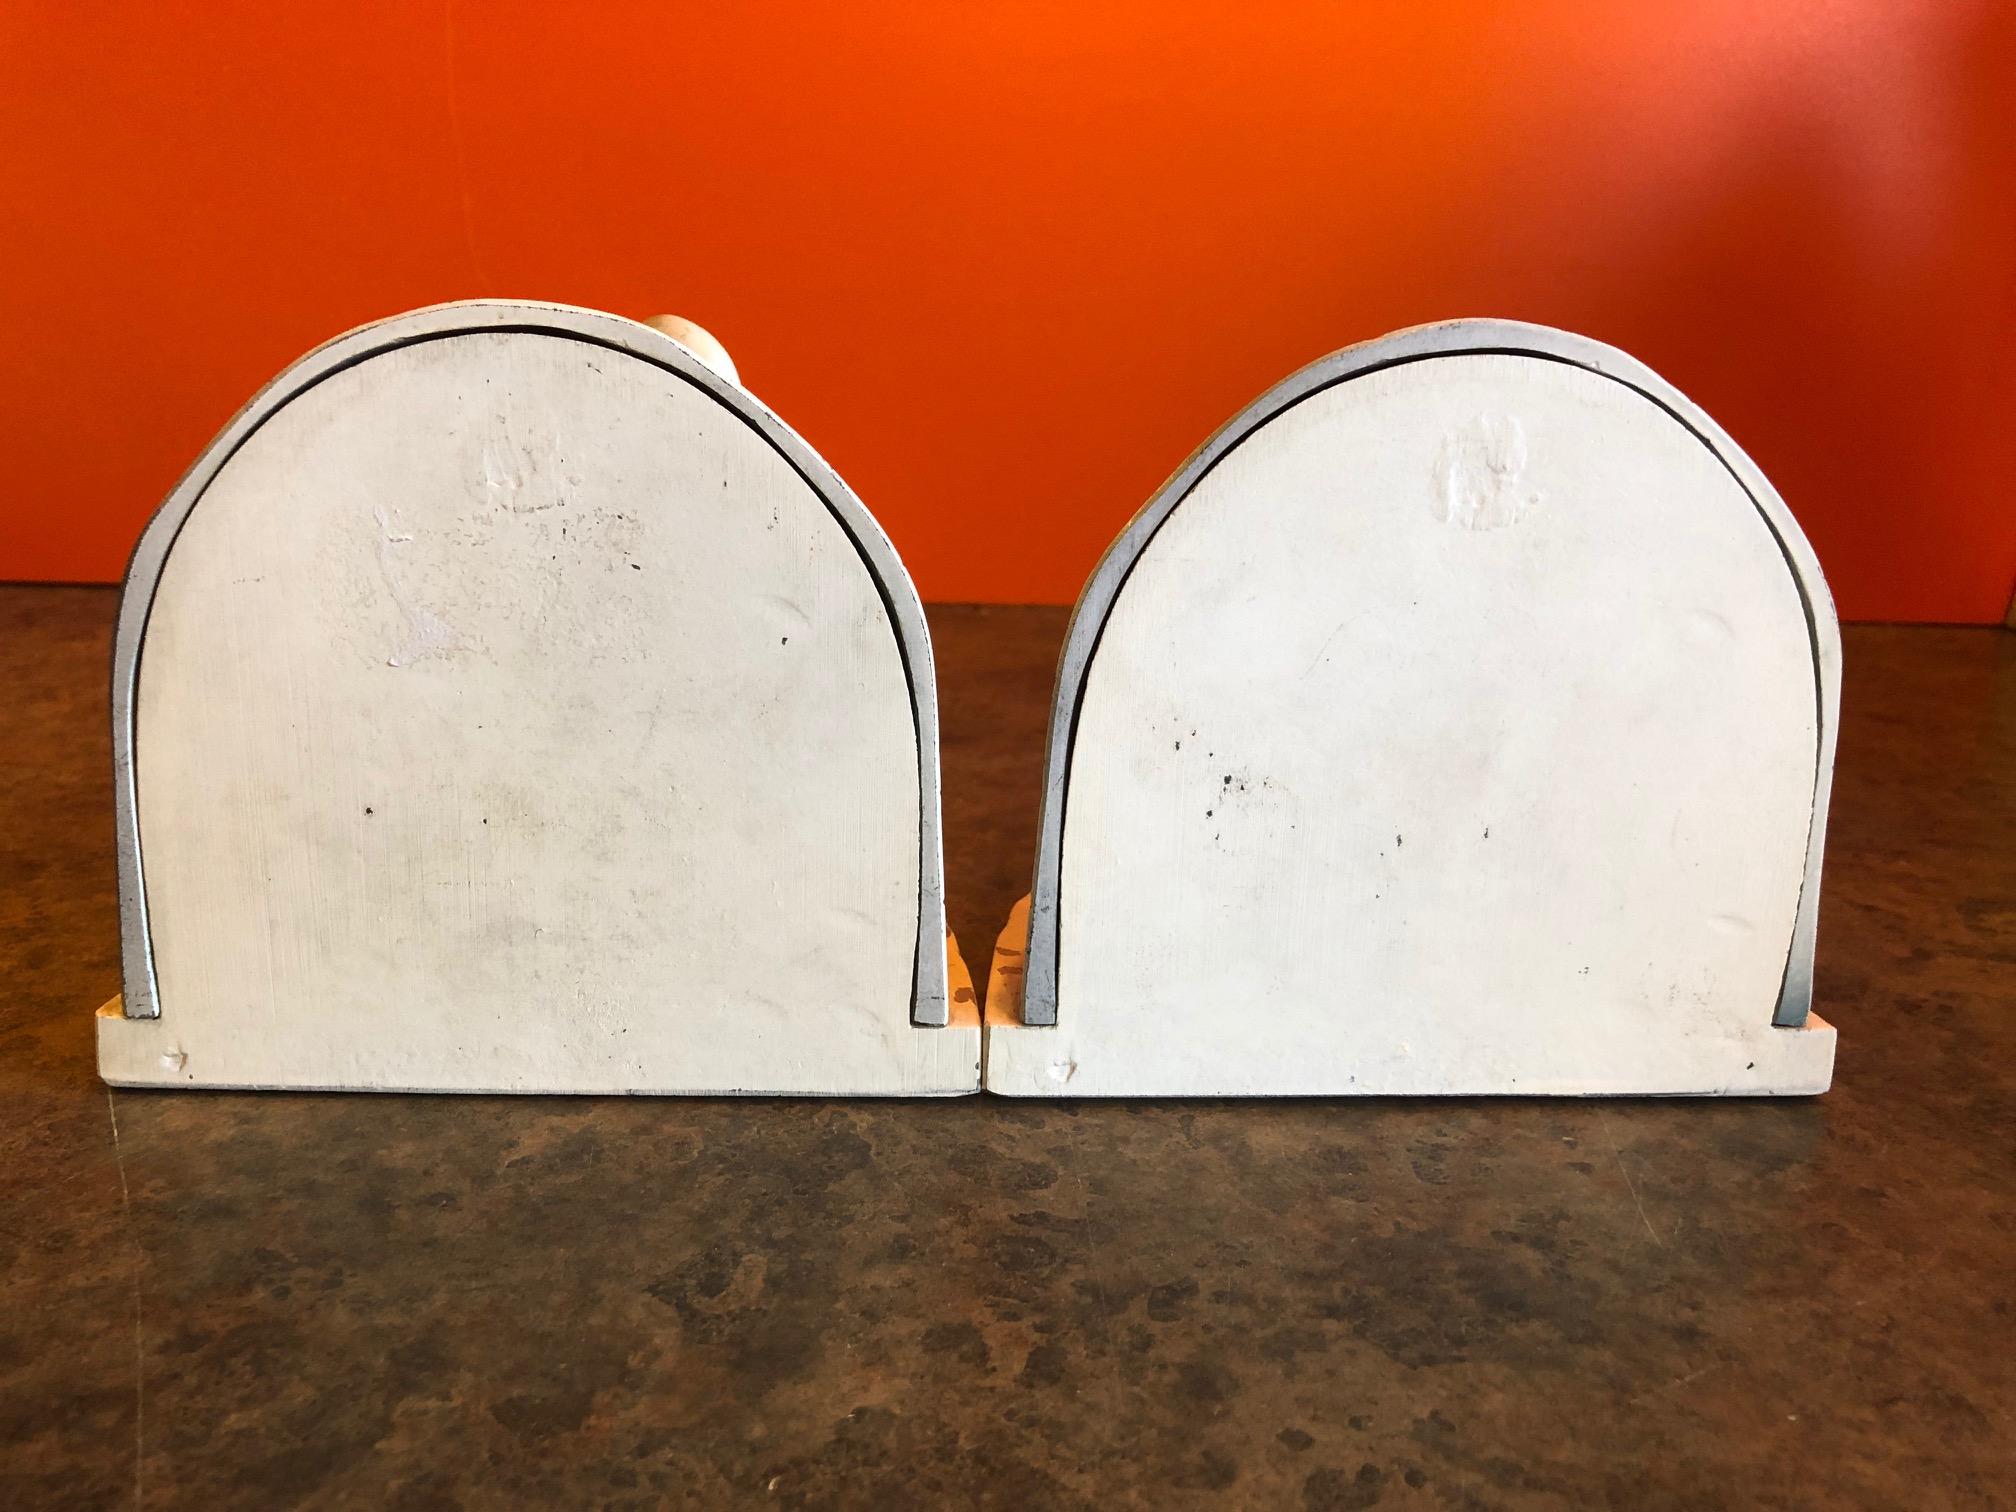 Pair of Aluminum Eskimo / Igloo Bookends by Kentucky Tavern Creations In Good Condition For Sale In San Diego, CA